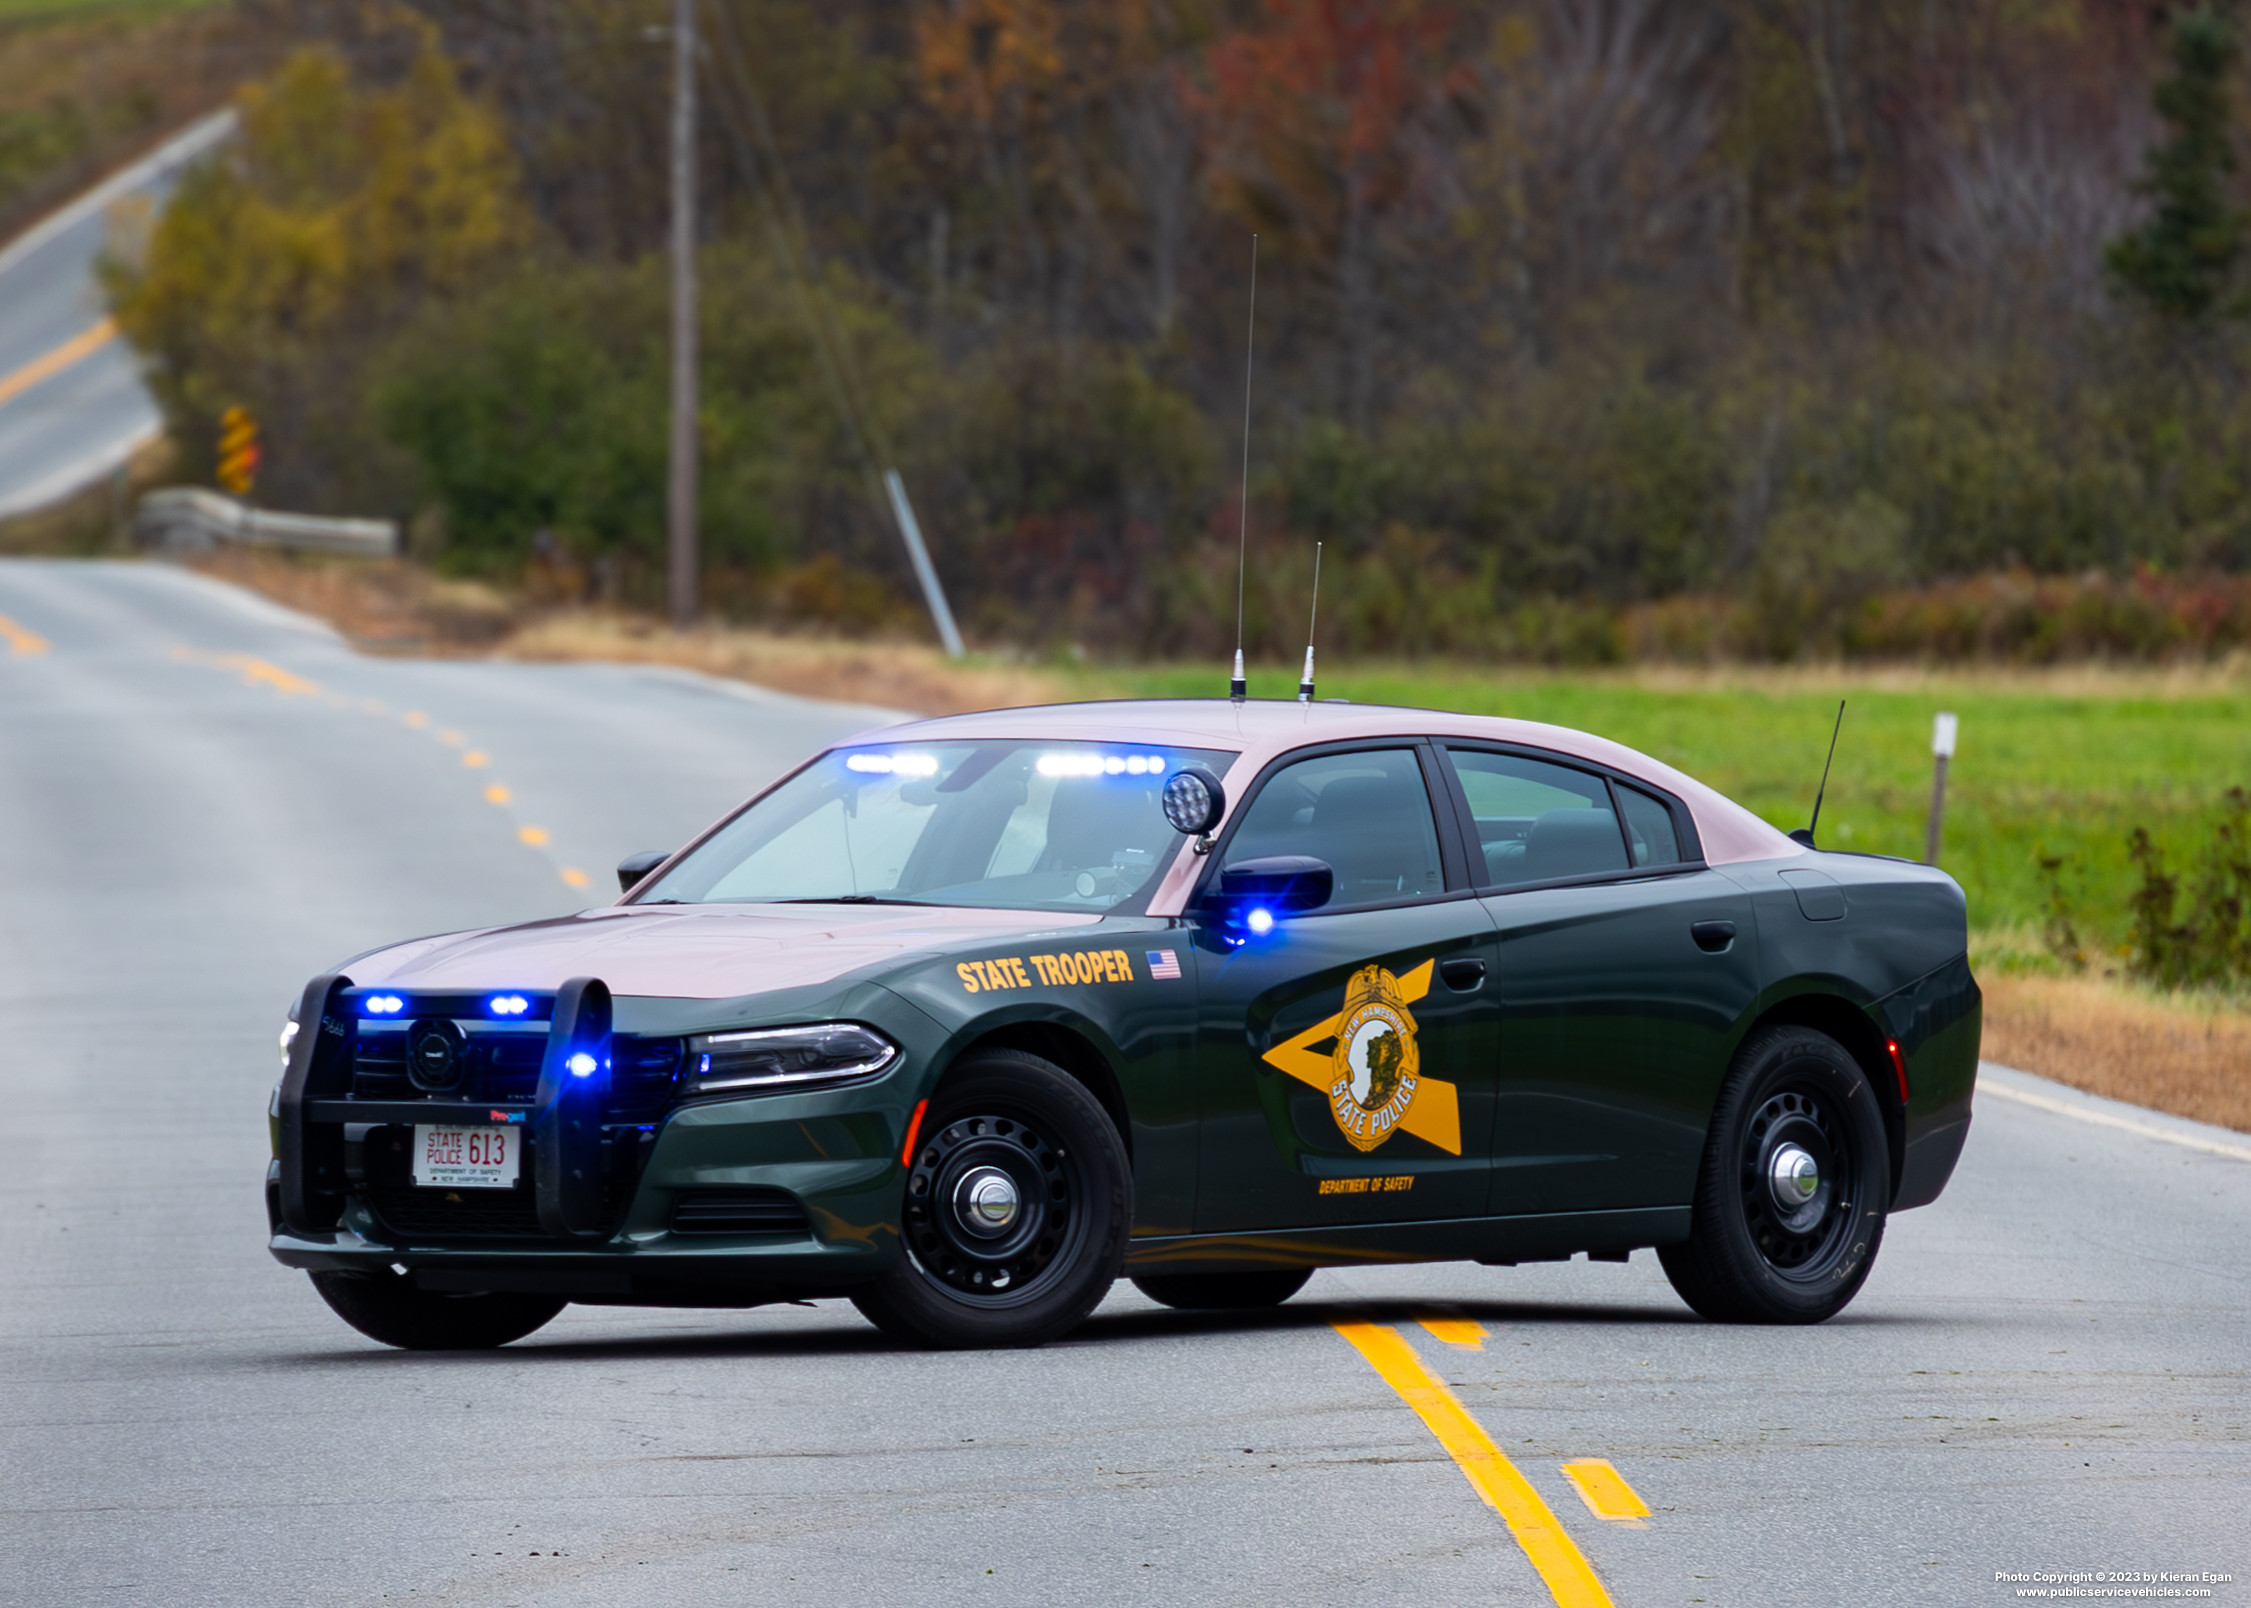 A photo  of New Hampshire State Police
            Cruiser 613, a 2022 Dodge Charger             taken by Kieran Egan